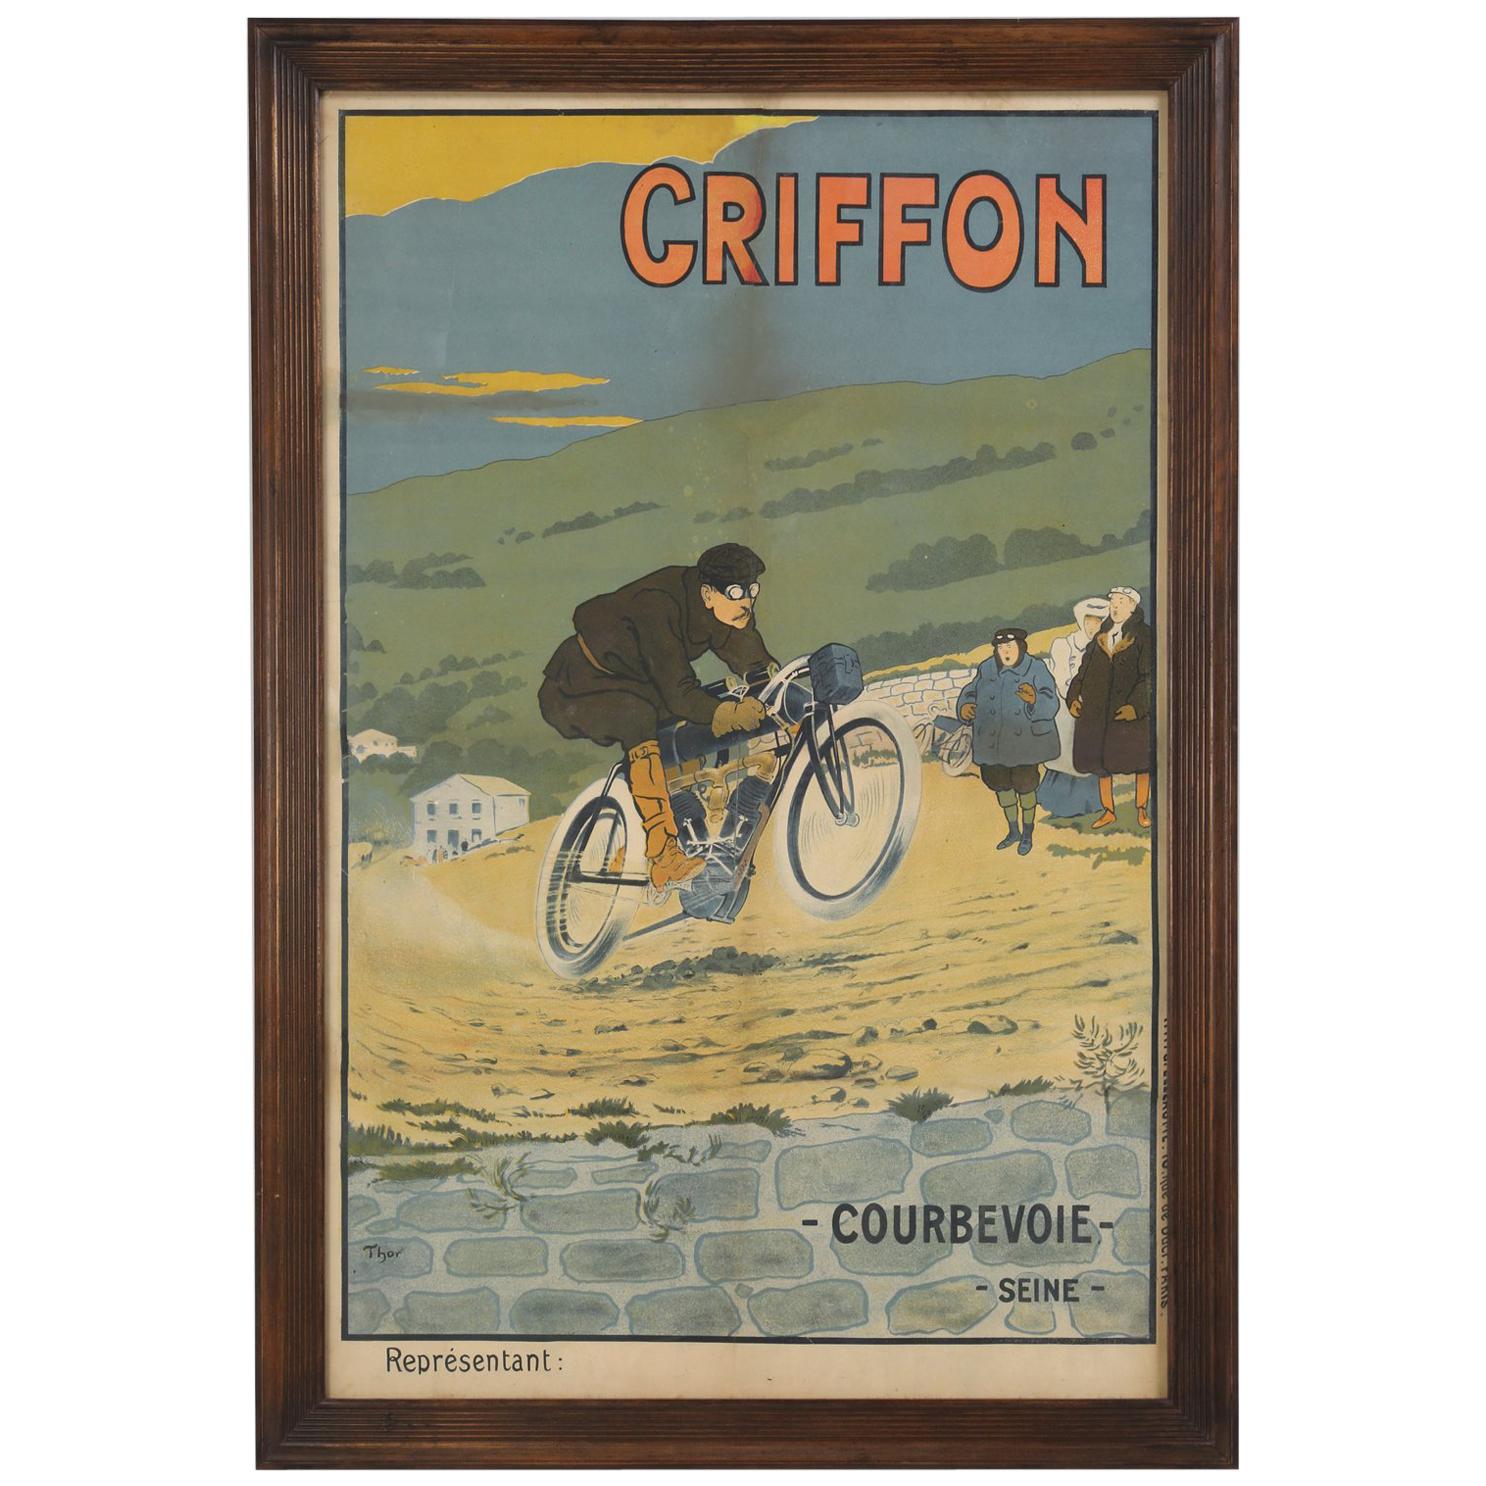 Antique Griffon Motorcycle Racing Poster by Walter Thor, circa 1910